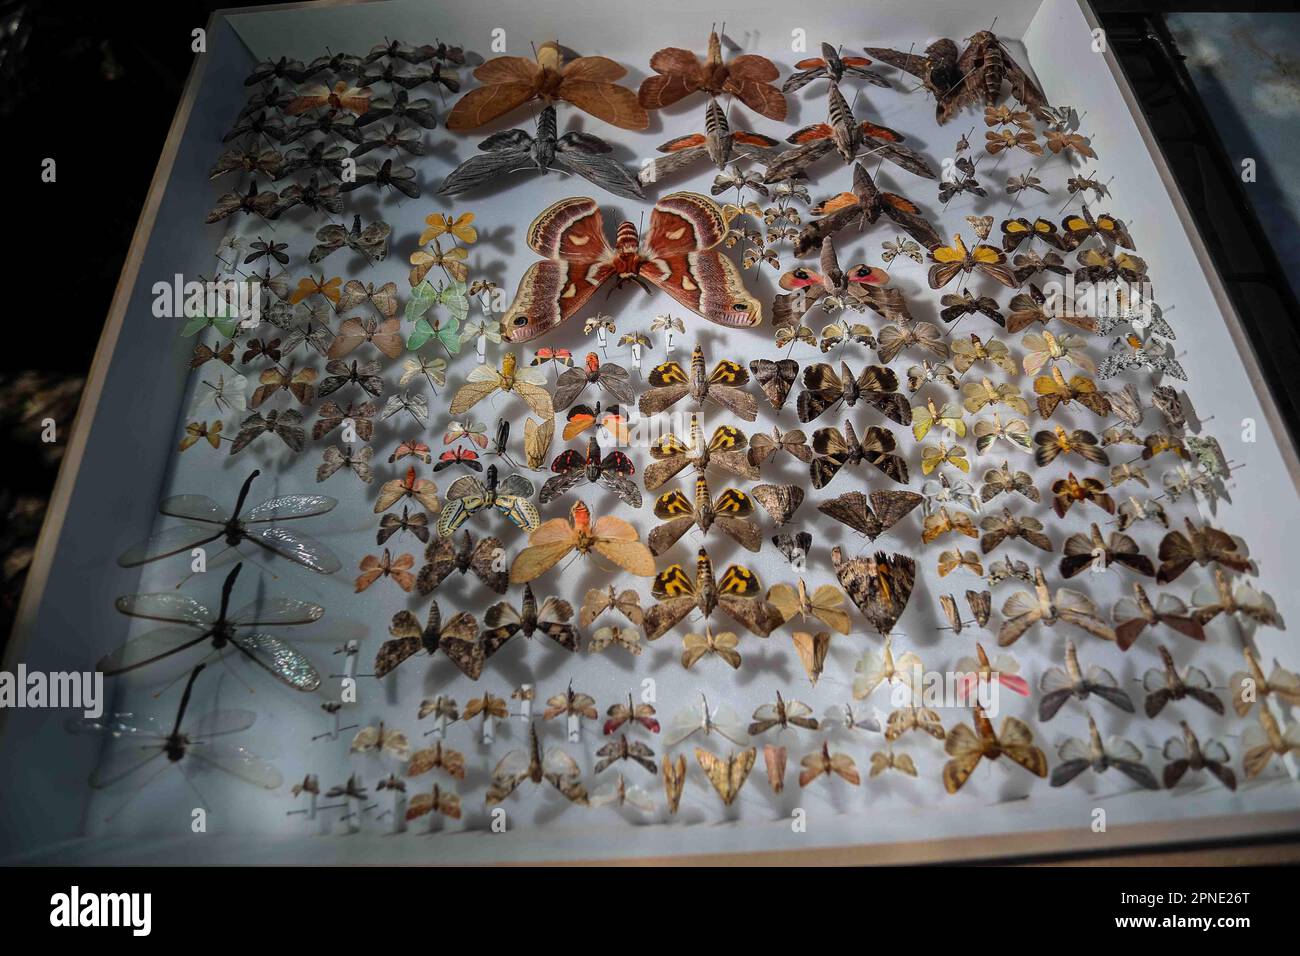 Biologist John Palting shows a collection of stuffed moth insects he collected. bugs.  During the expedition, biologists and scientists from MEX and the USA from different disciplines of biological sciences and personnel from the AJOS-BAVISPE CONANP National Forest Reserve and Wildlife Refuge, in the Sierra Buenos Aires carry out the Madrean Diversity Expedition (MDE) in Sonora Mexico. Conservation , Nature (© Photo by Luis Gutierrez / Norte Photo) biologo John Palting muestra una colecion de insectos palomillas disecadas que recolecto. bichos.  Durante expedition de biologos y científicos de Stock Photo